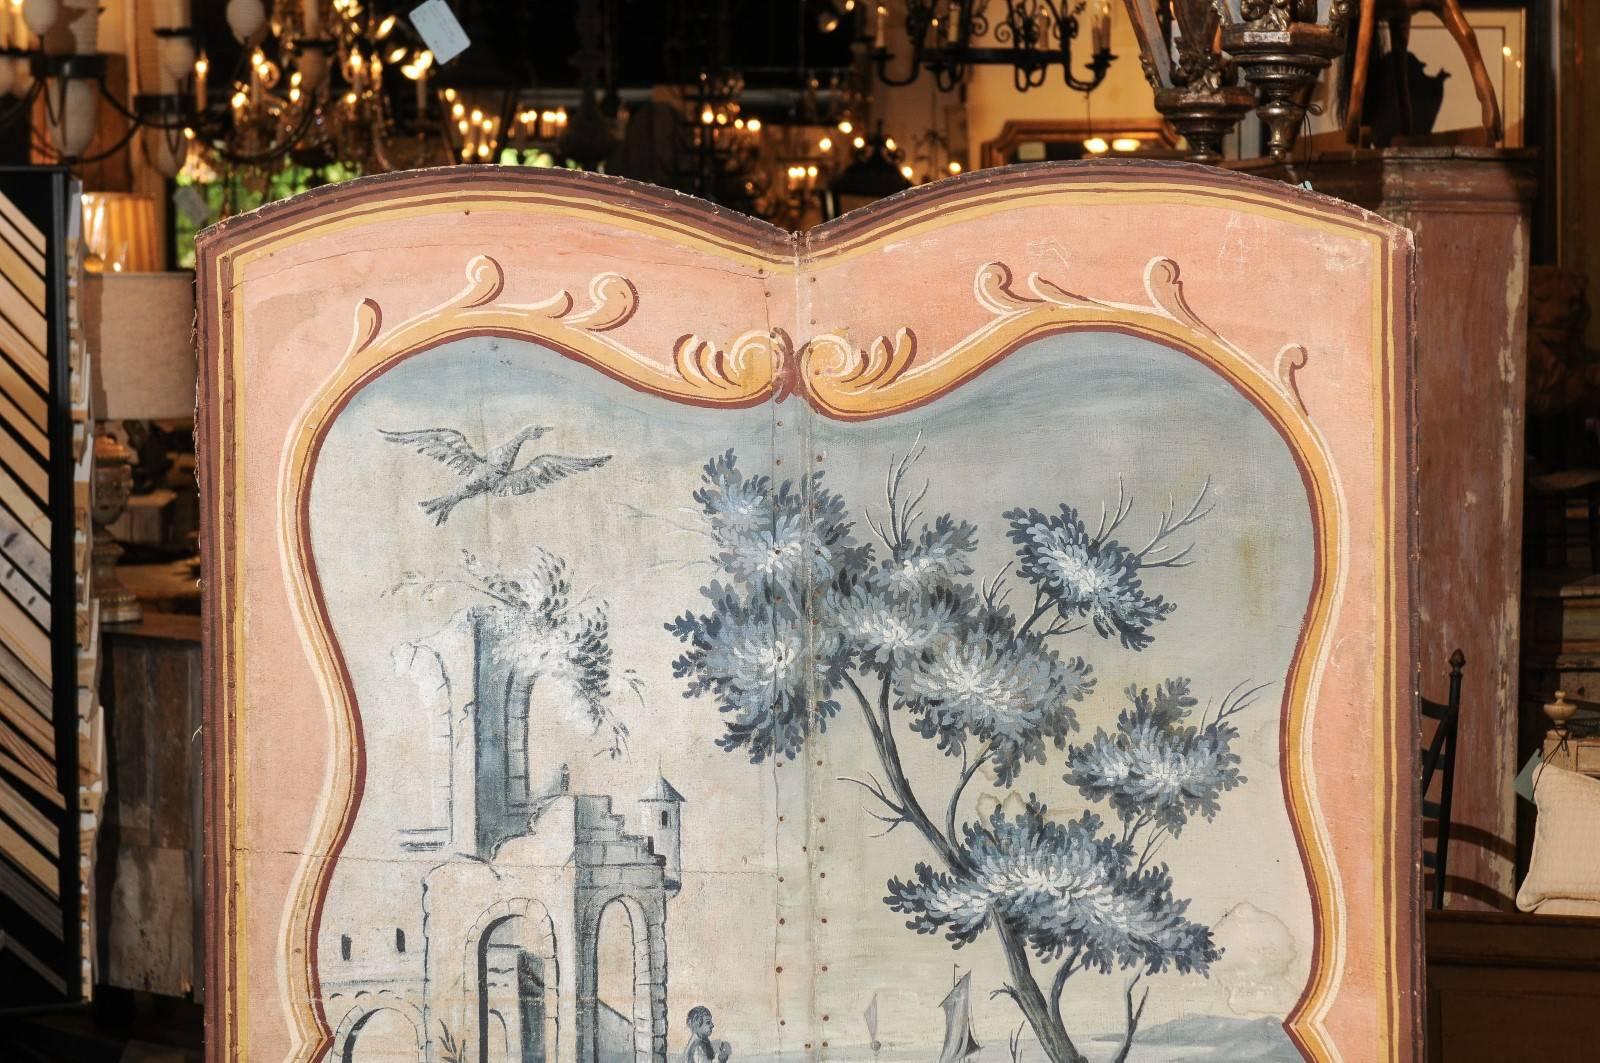 A pair of French grisaille pastoral hand-painted folding screens from the late 18th century. Each of these French screens features two panels adorned with an exquisite grisaille hand-painted scene set inside a trompe-l'oeil painted frame. These